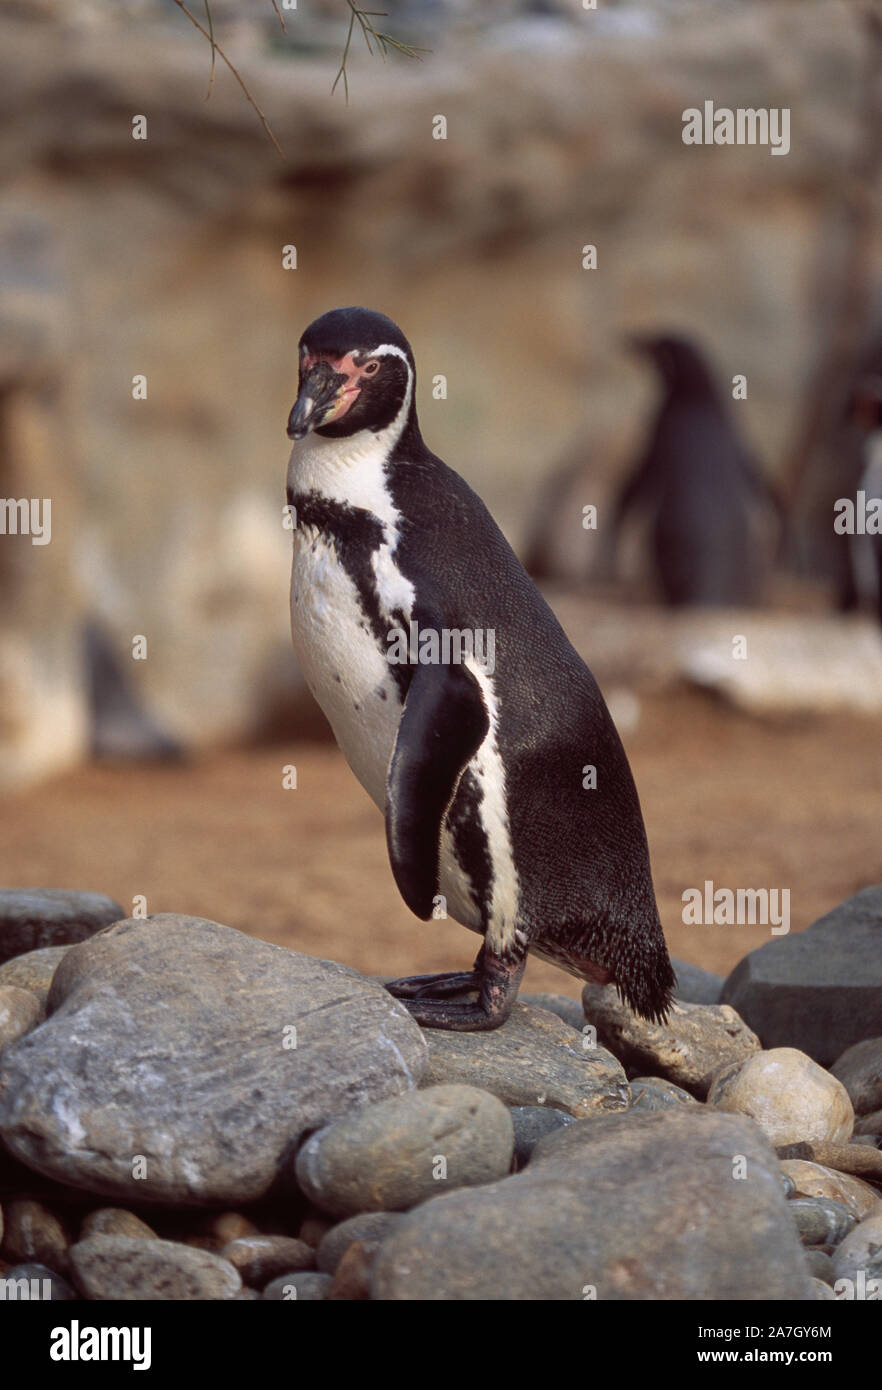 HUMBOLDT'S PENGUIN  (Spheniscus humboldti).  In a zoo. Adult standing on rocks, boulders. Webbed feet, flipper like wing adaptation for swimming. Stock Photo